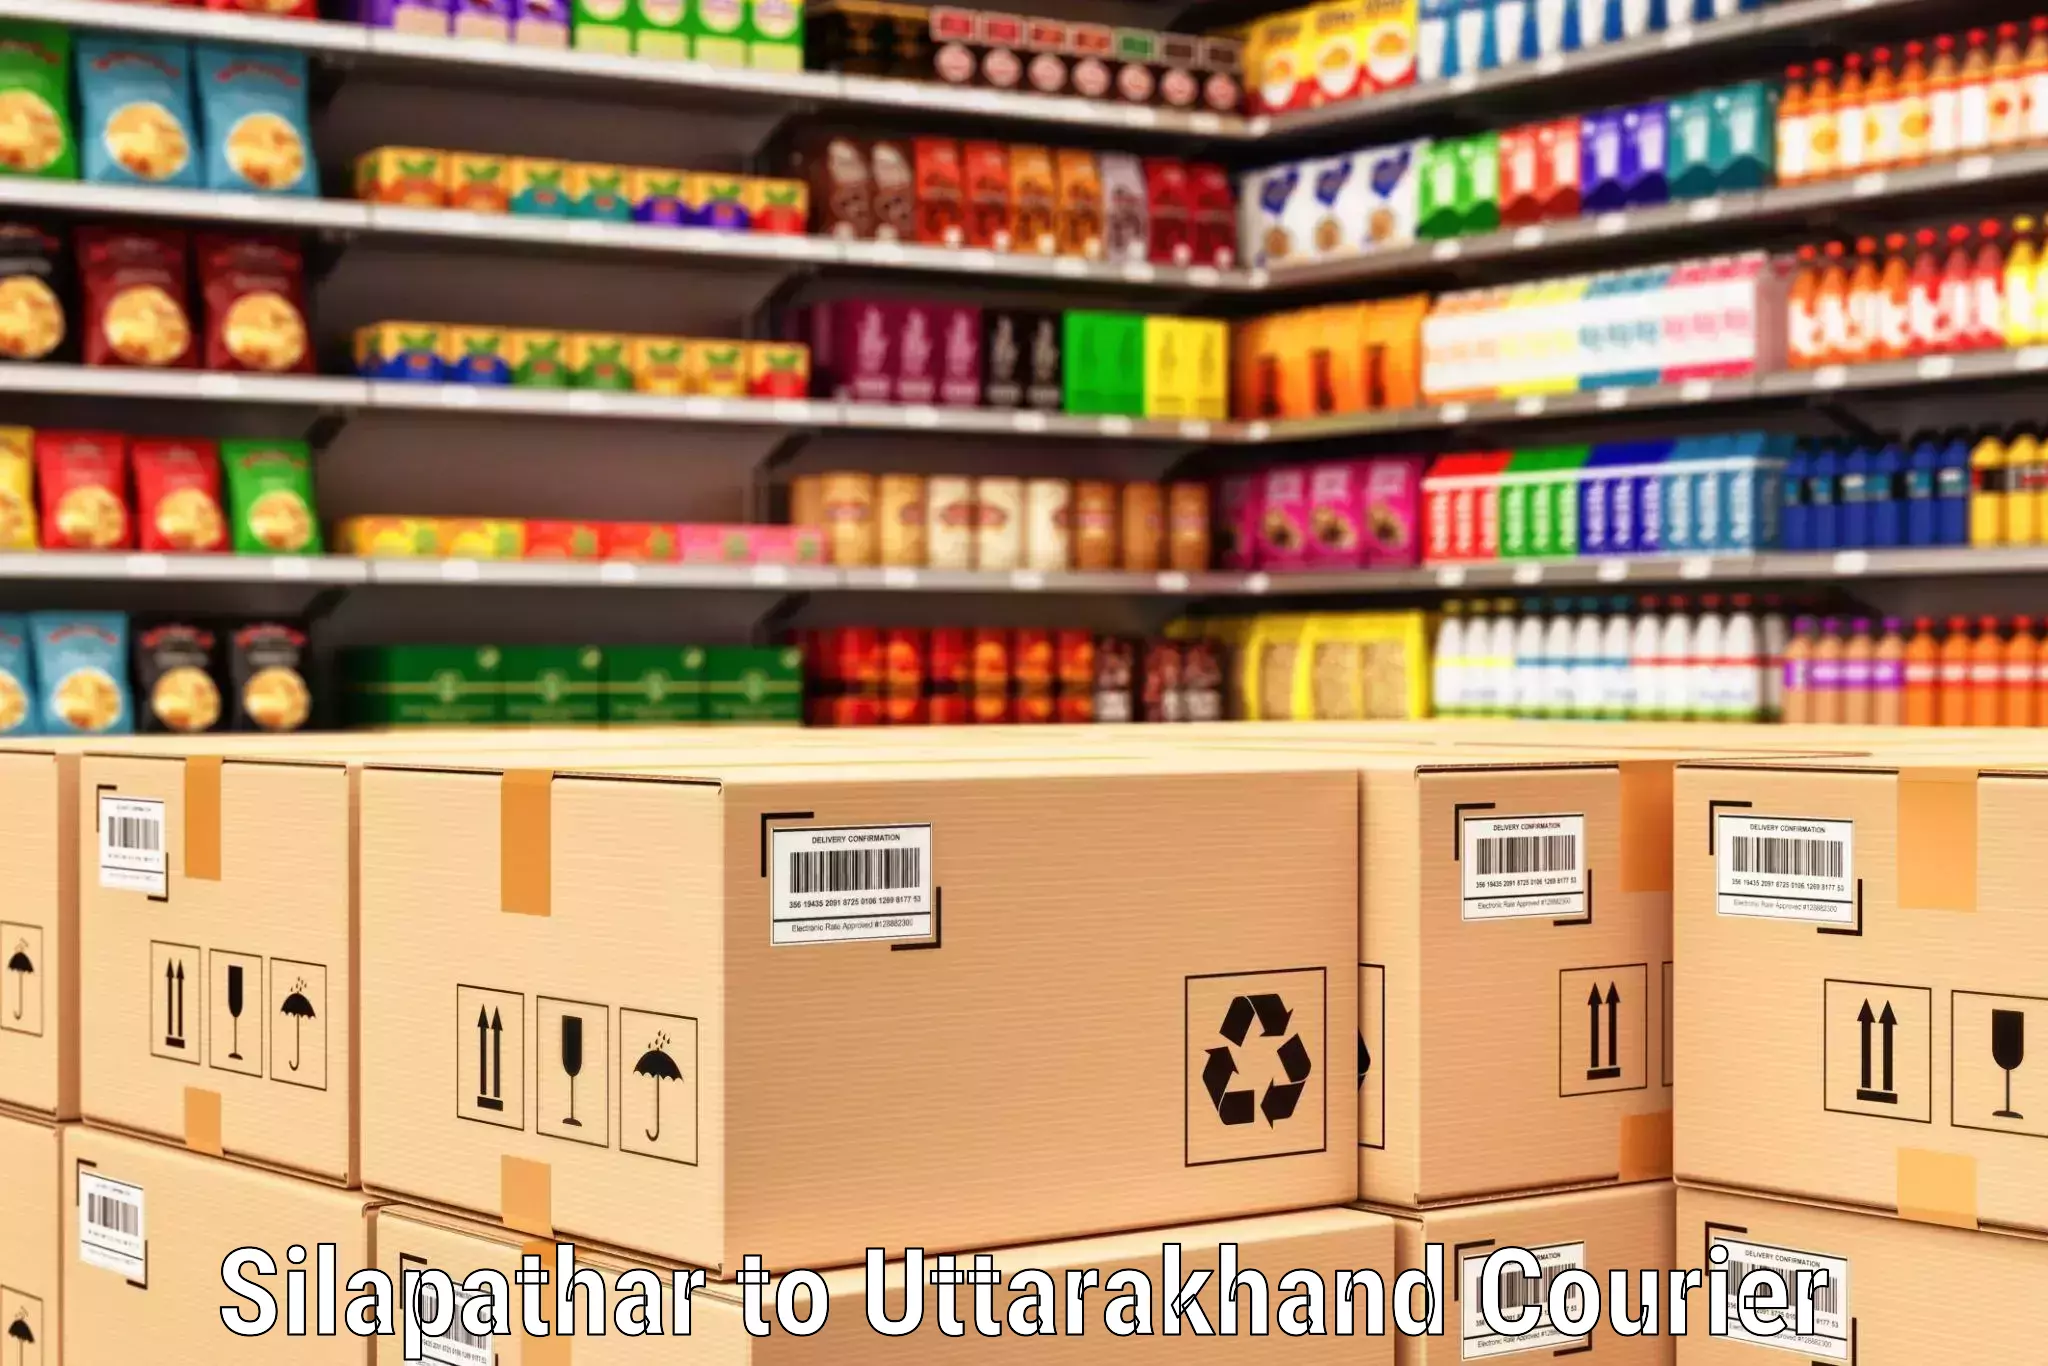 Affordable logistics services Silapathar to Rishikesh